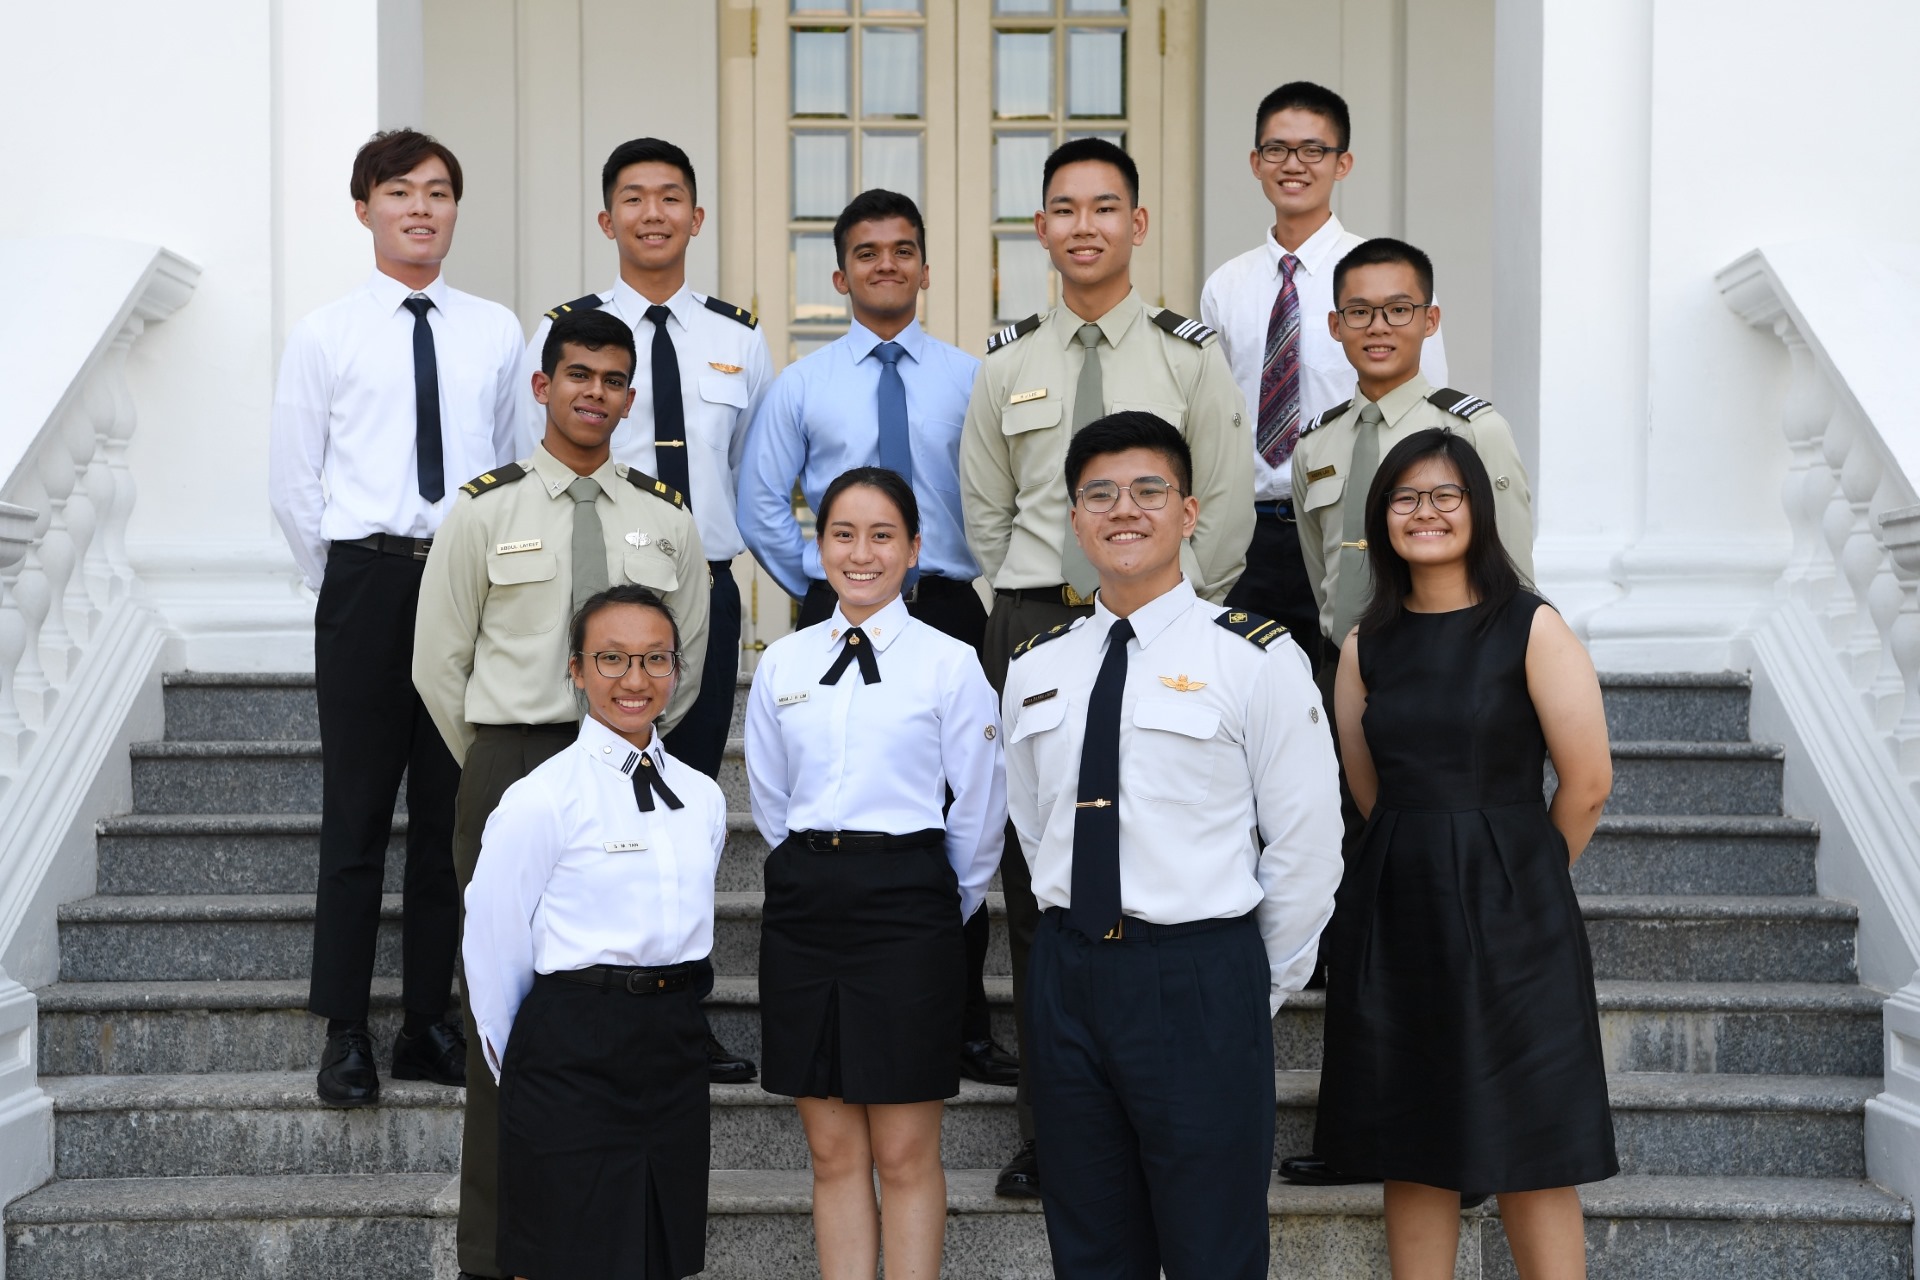 Scholarship recipients at the Defence Scholarship Awards Ceremony held at the Istana this evening.